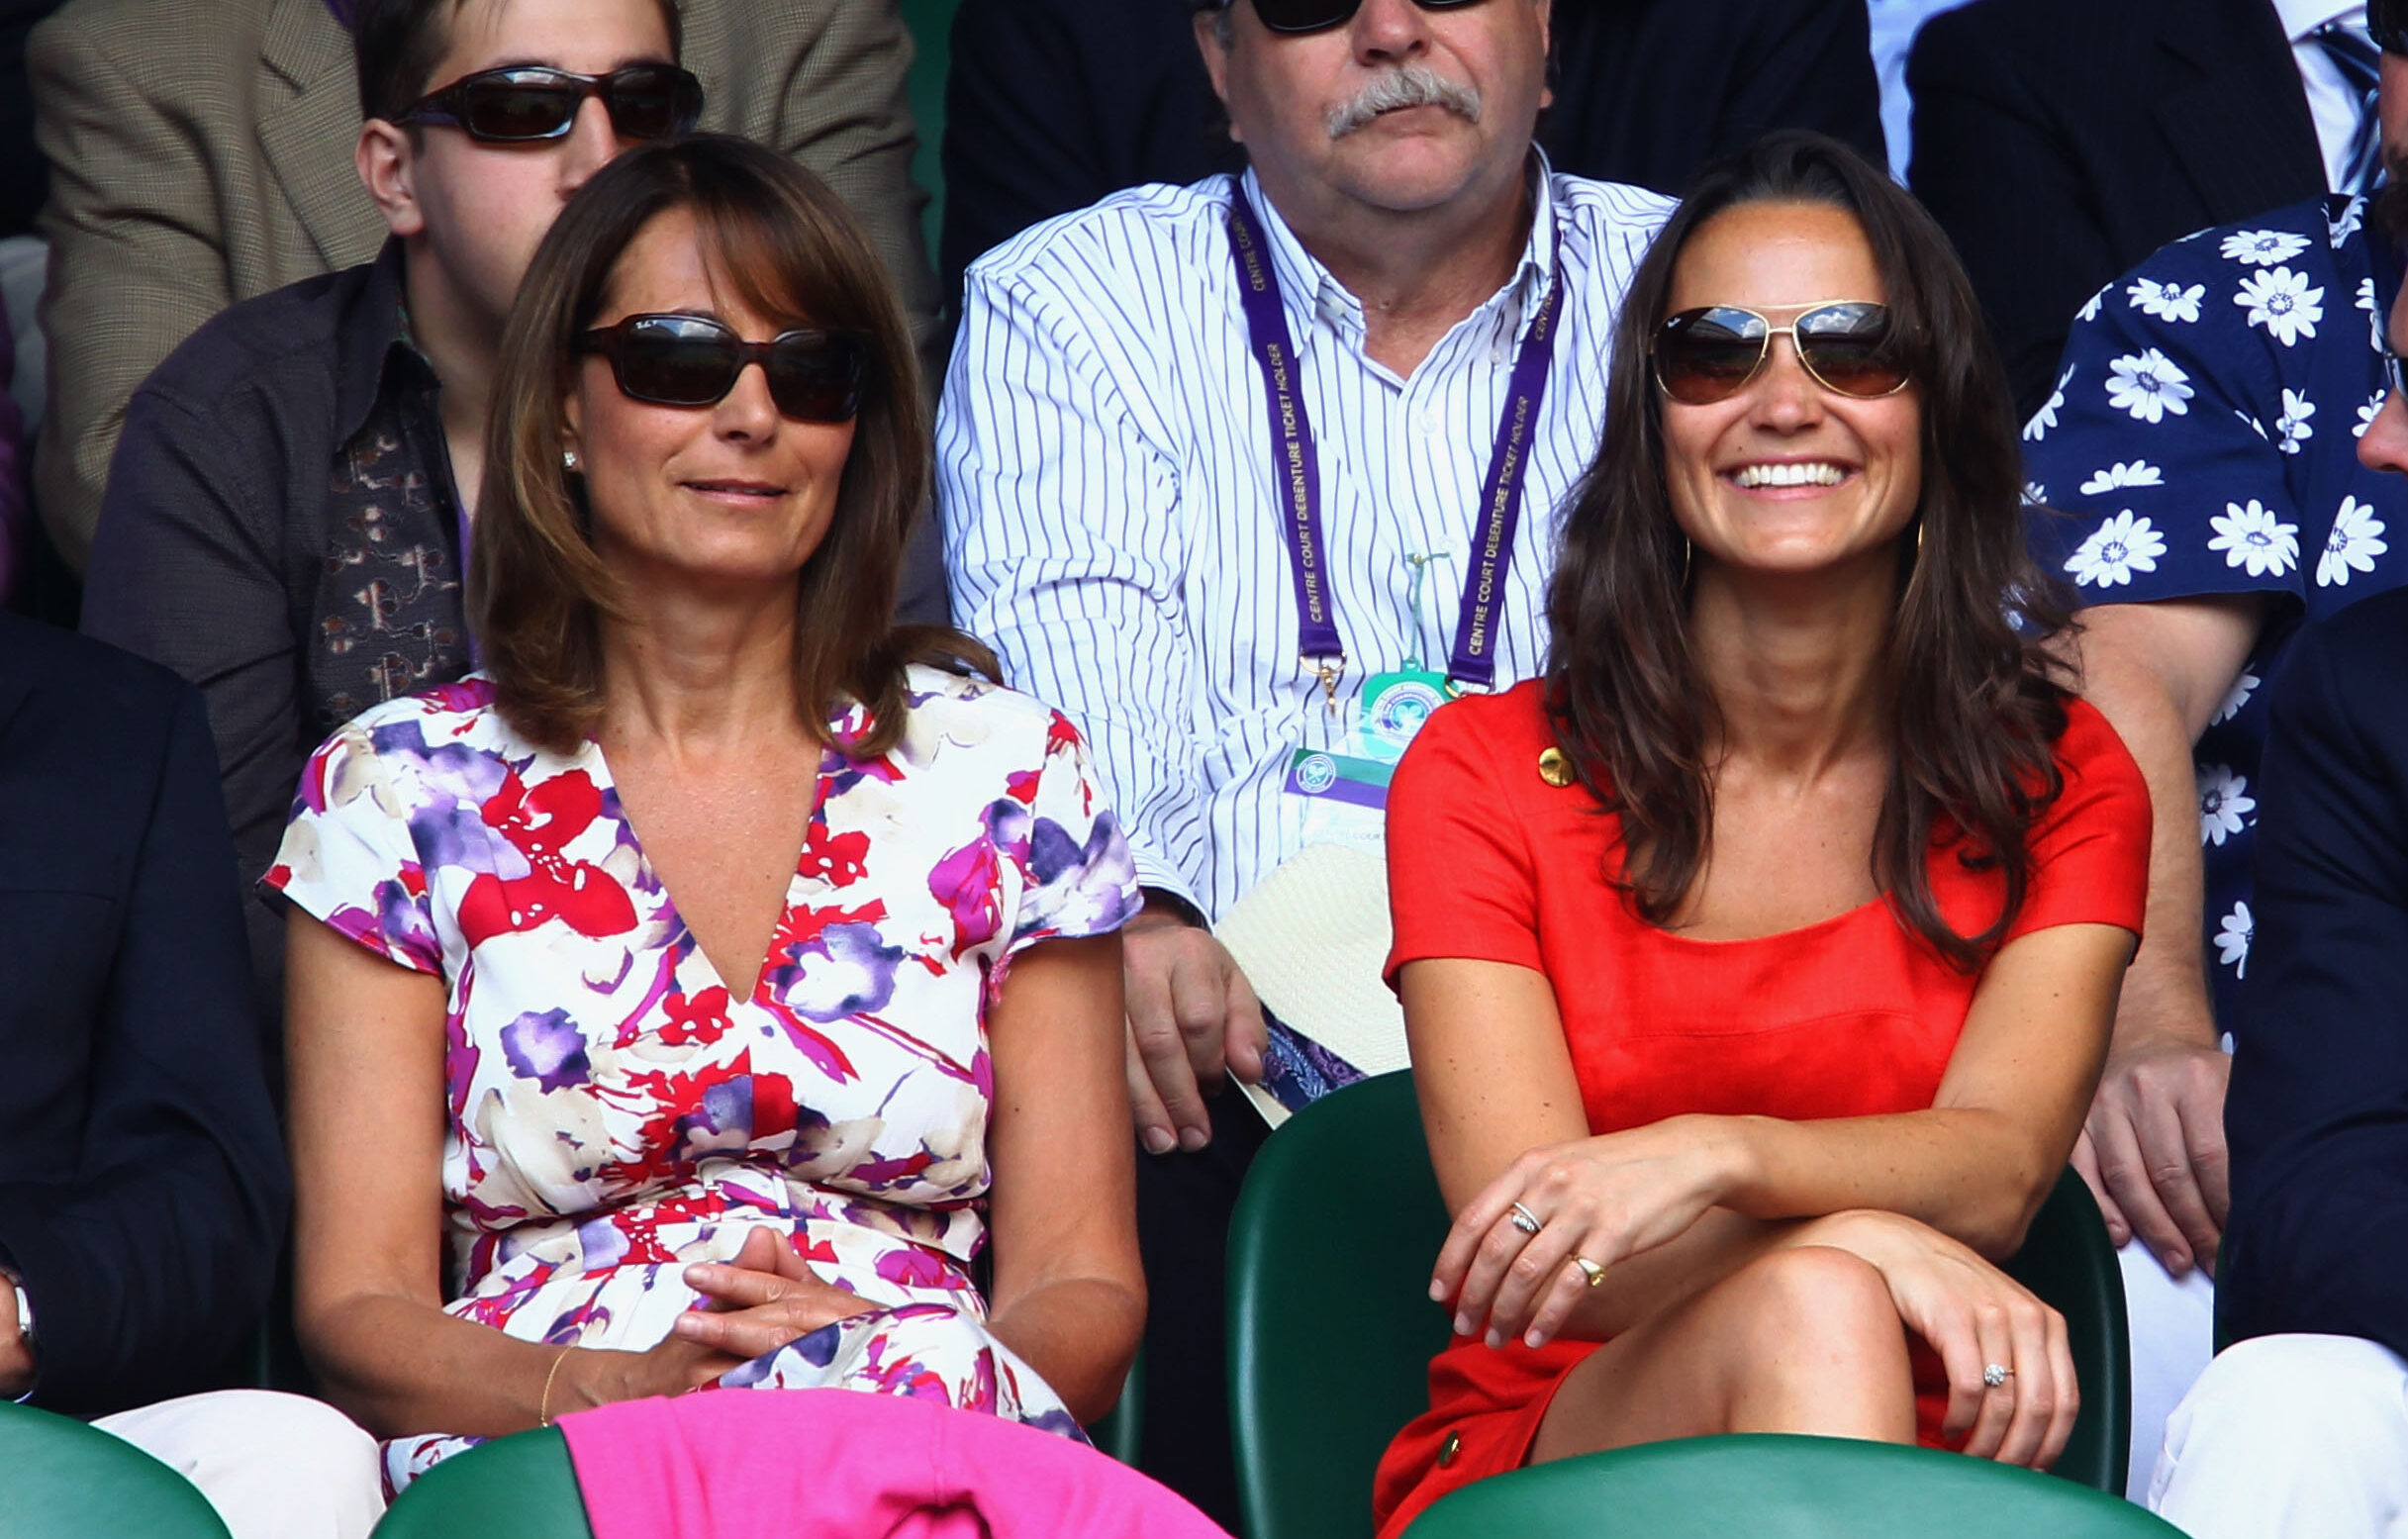 Carole Middleton (L) and Pippa smiling and sitting in sports bleachers wearing sunglasses